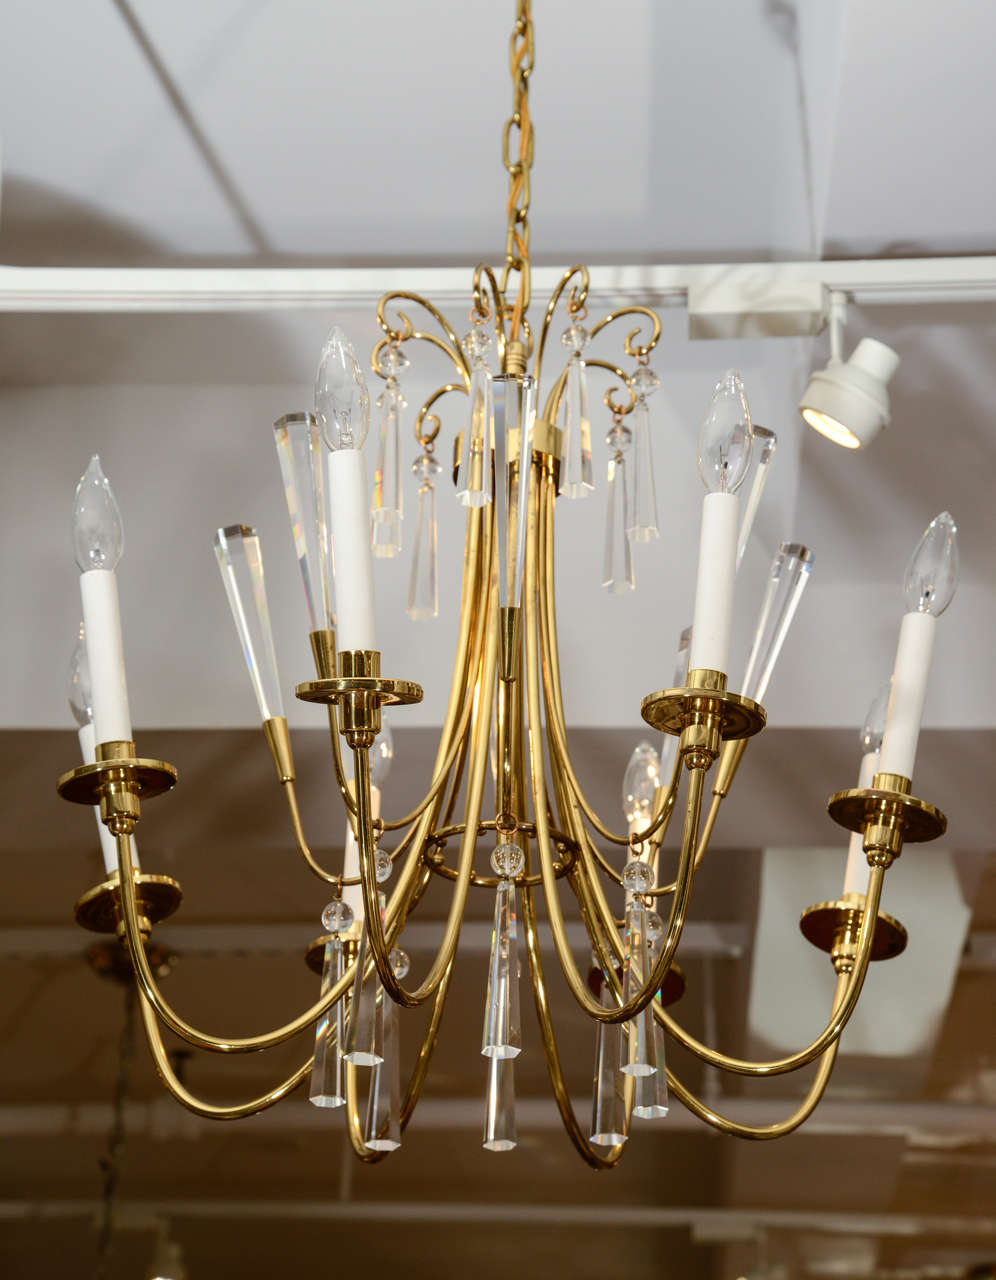 A lovely eight-arm German chandelier with crystal accents, circa 1970.